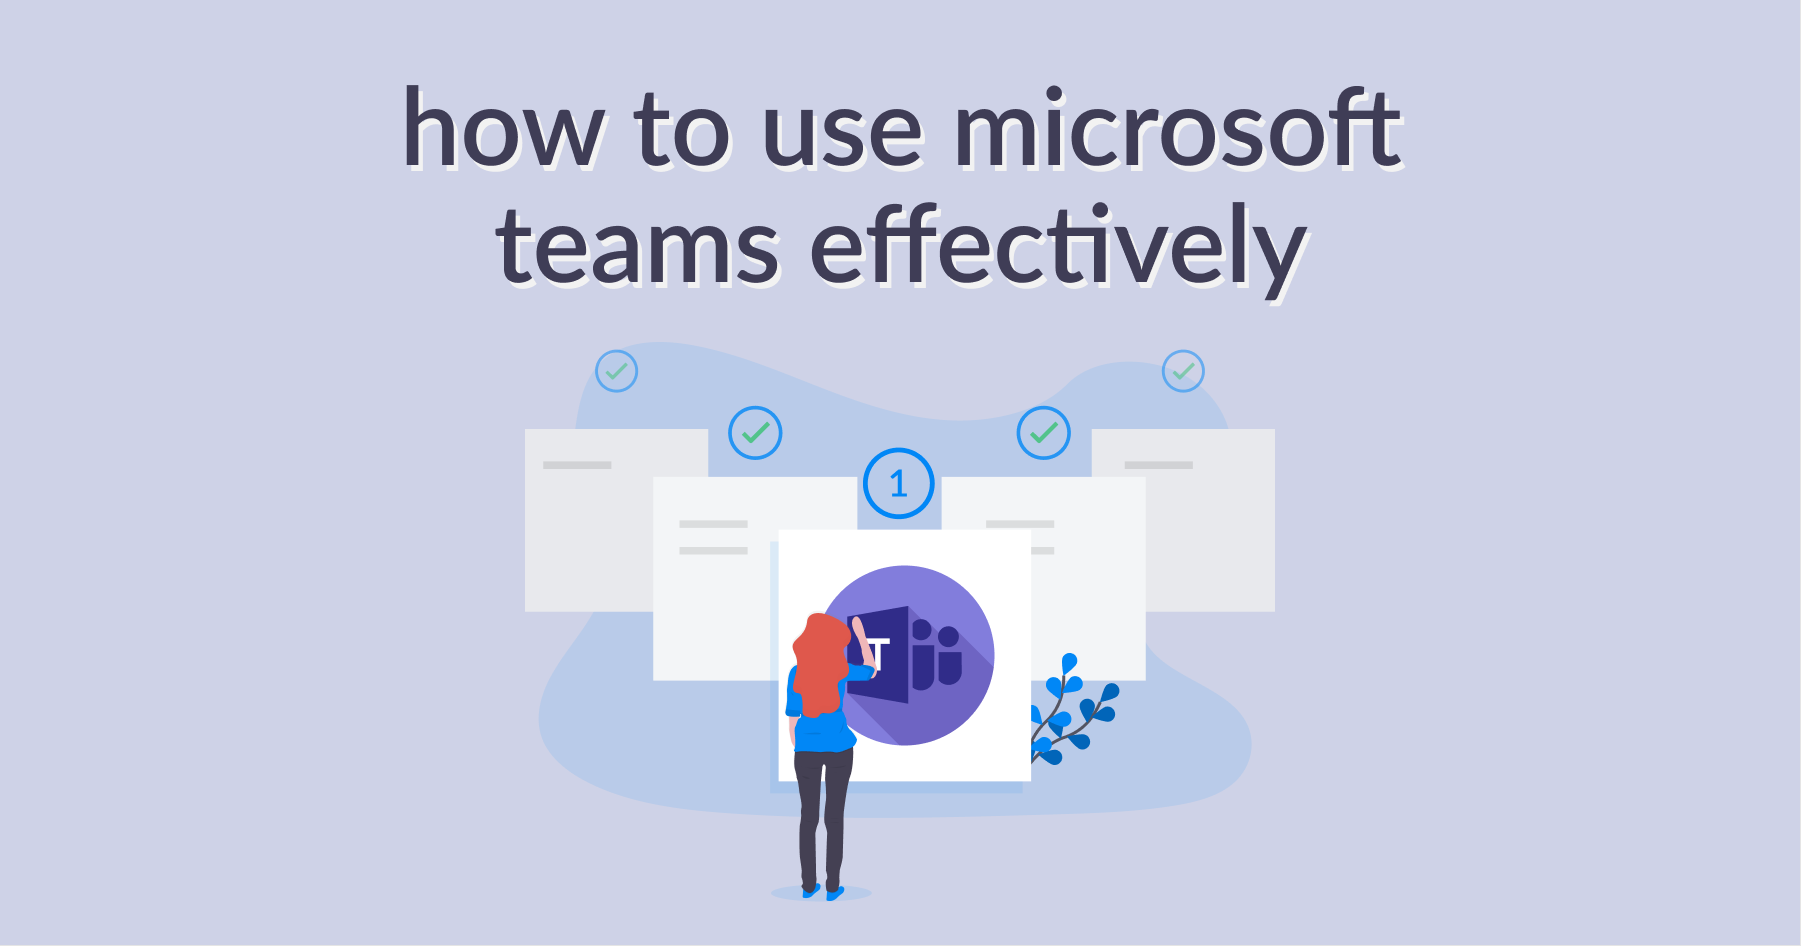 How To Use Microsoft Teams Effectively Guide 1: The Basics